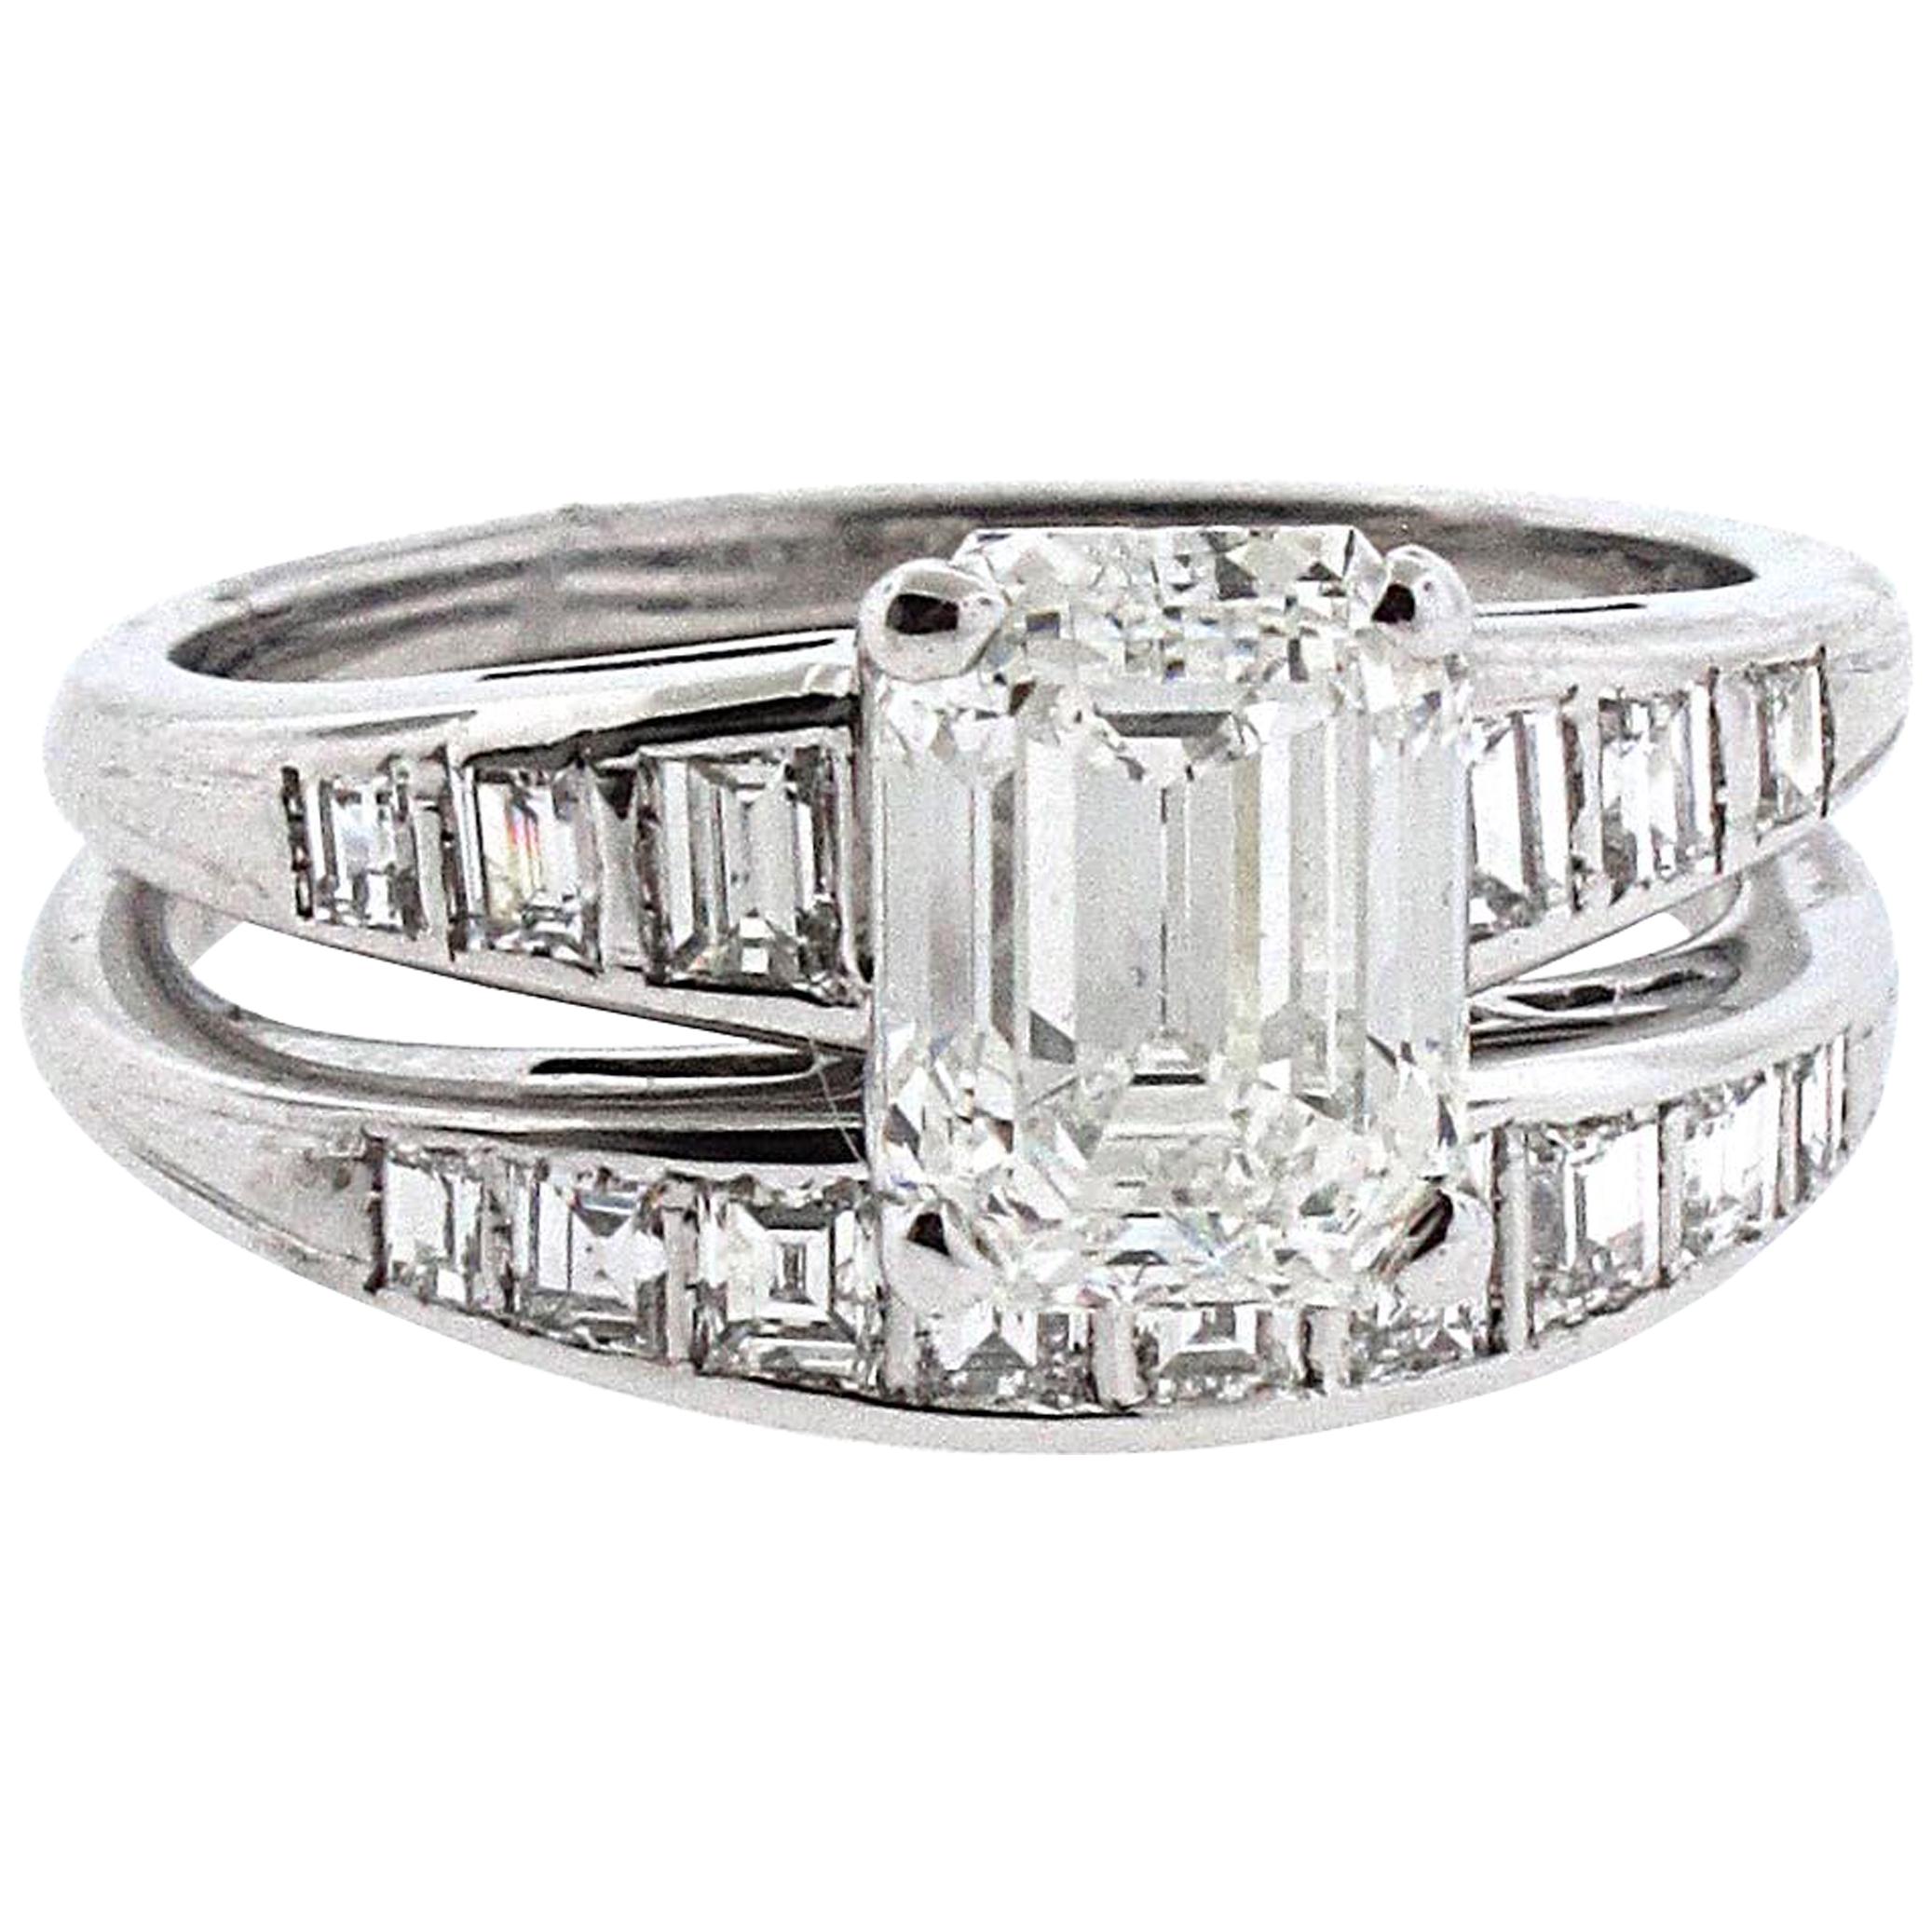 GIA Certified 1.71 H-VS2 Emerald Cut Diamond Engagement Ring with Matching Band